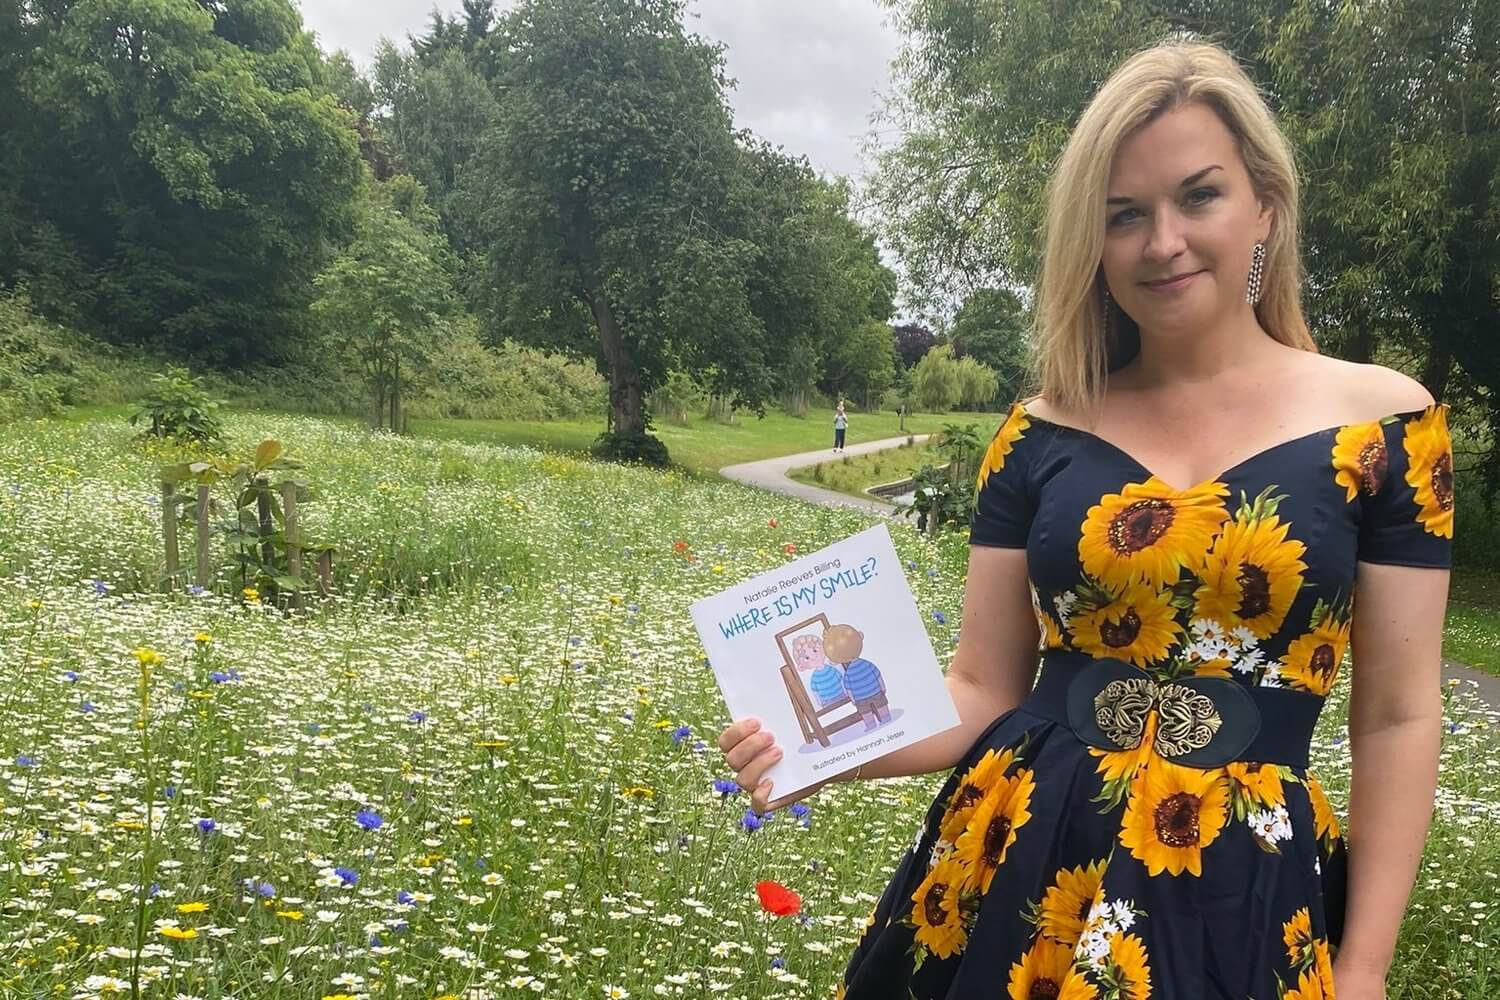 Natalie Reeves Billing poses with a copy of Where Is My Smile? — a book about children's mental health